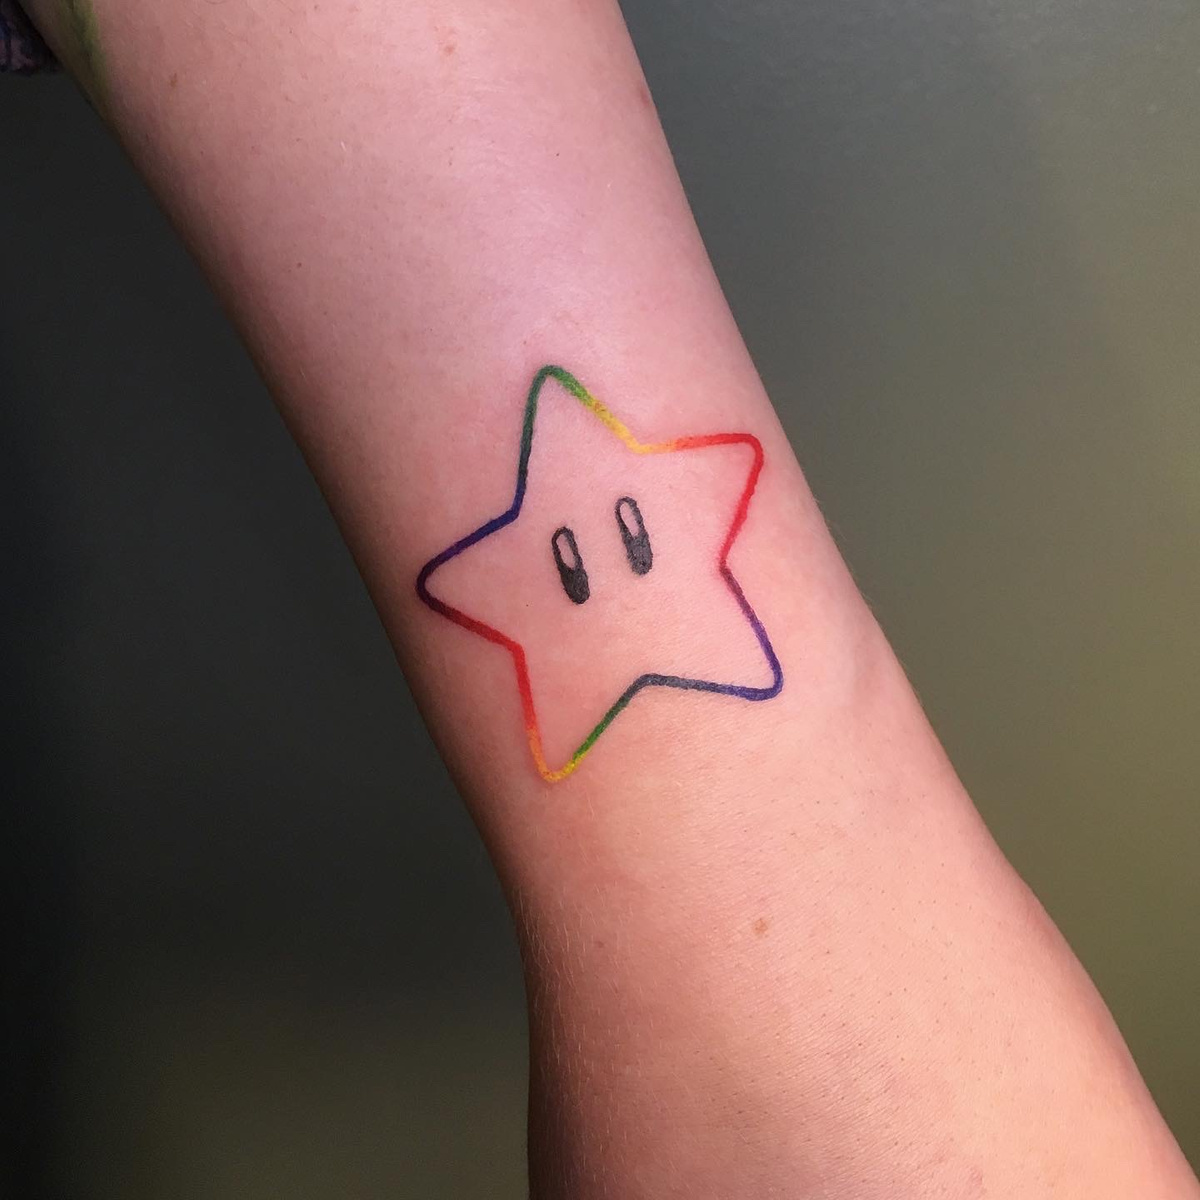 Finally got my Mario star touched up after it not healing the first 2  times Looks like 3rd times the charm  rtattoo